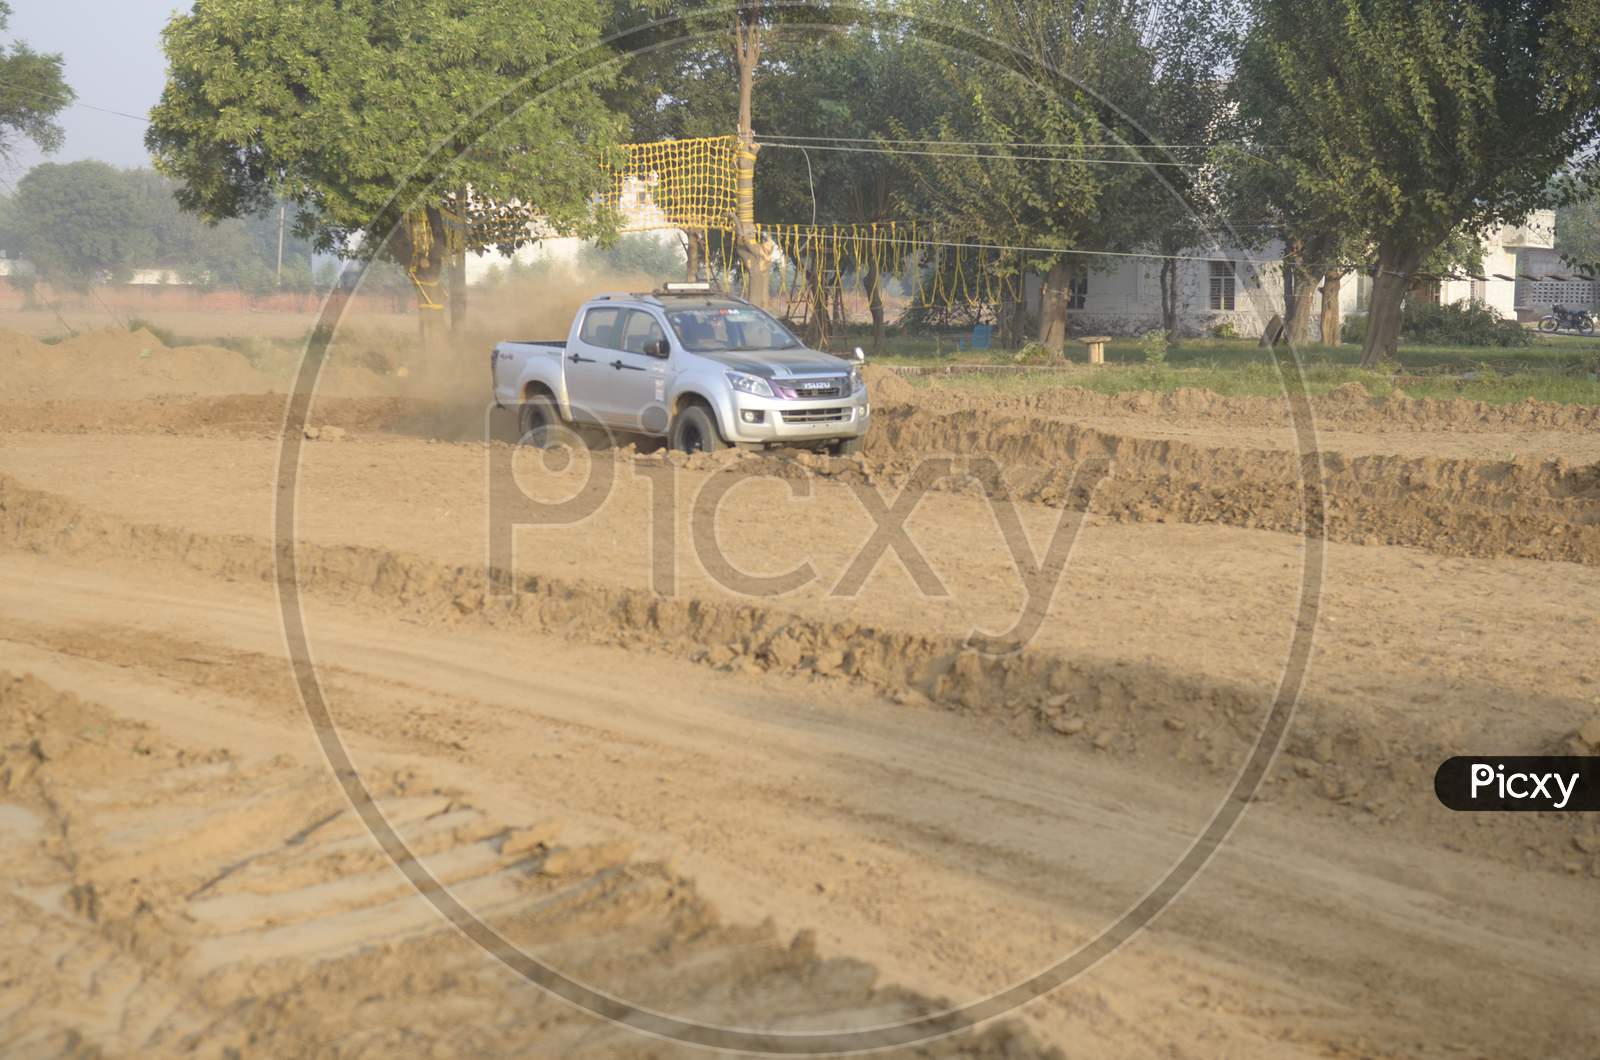 View of Isuzu Maxo taking a turn during rally race